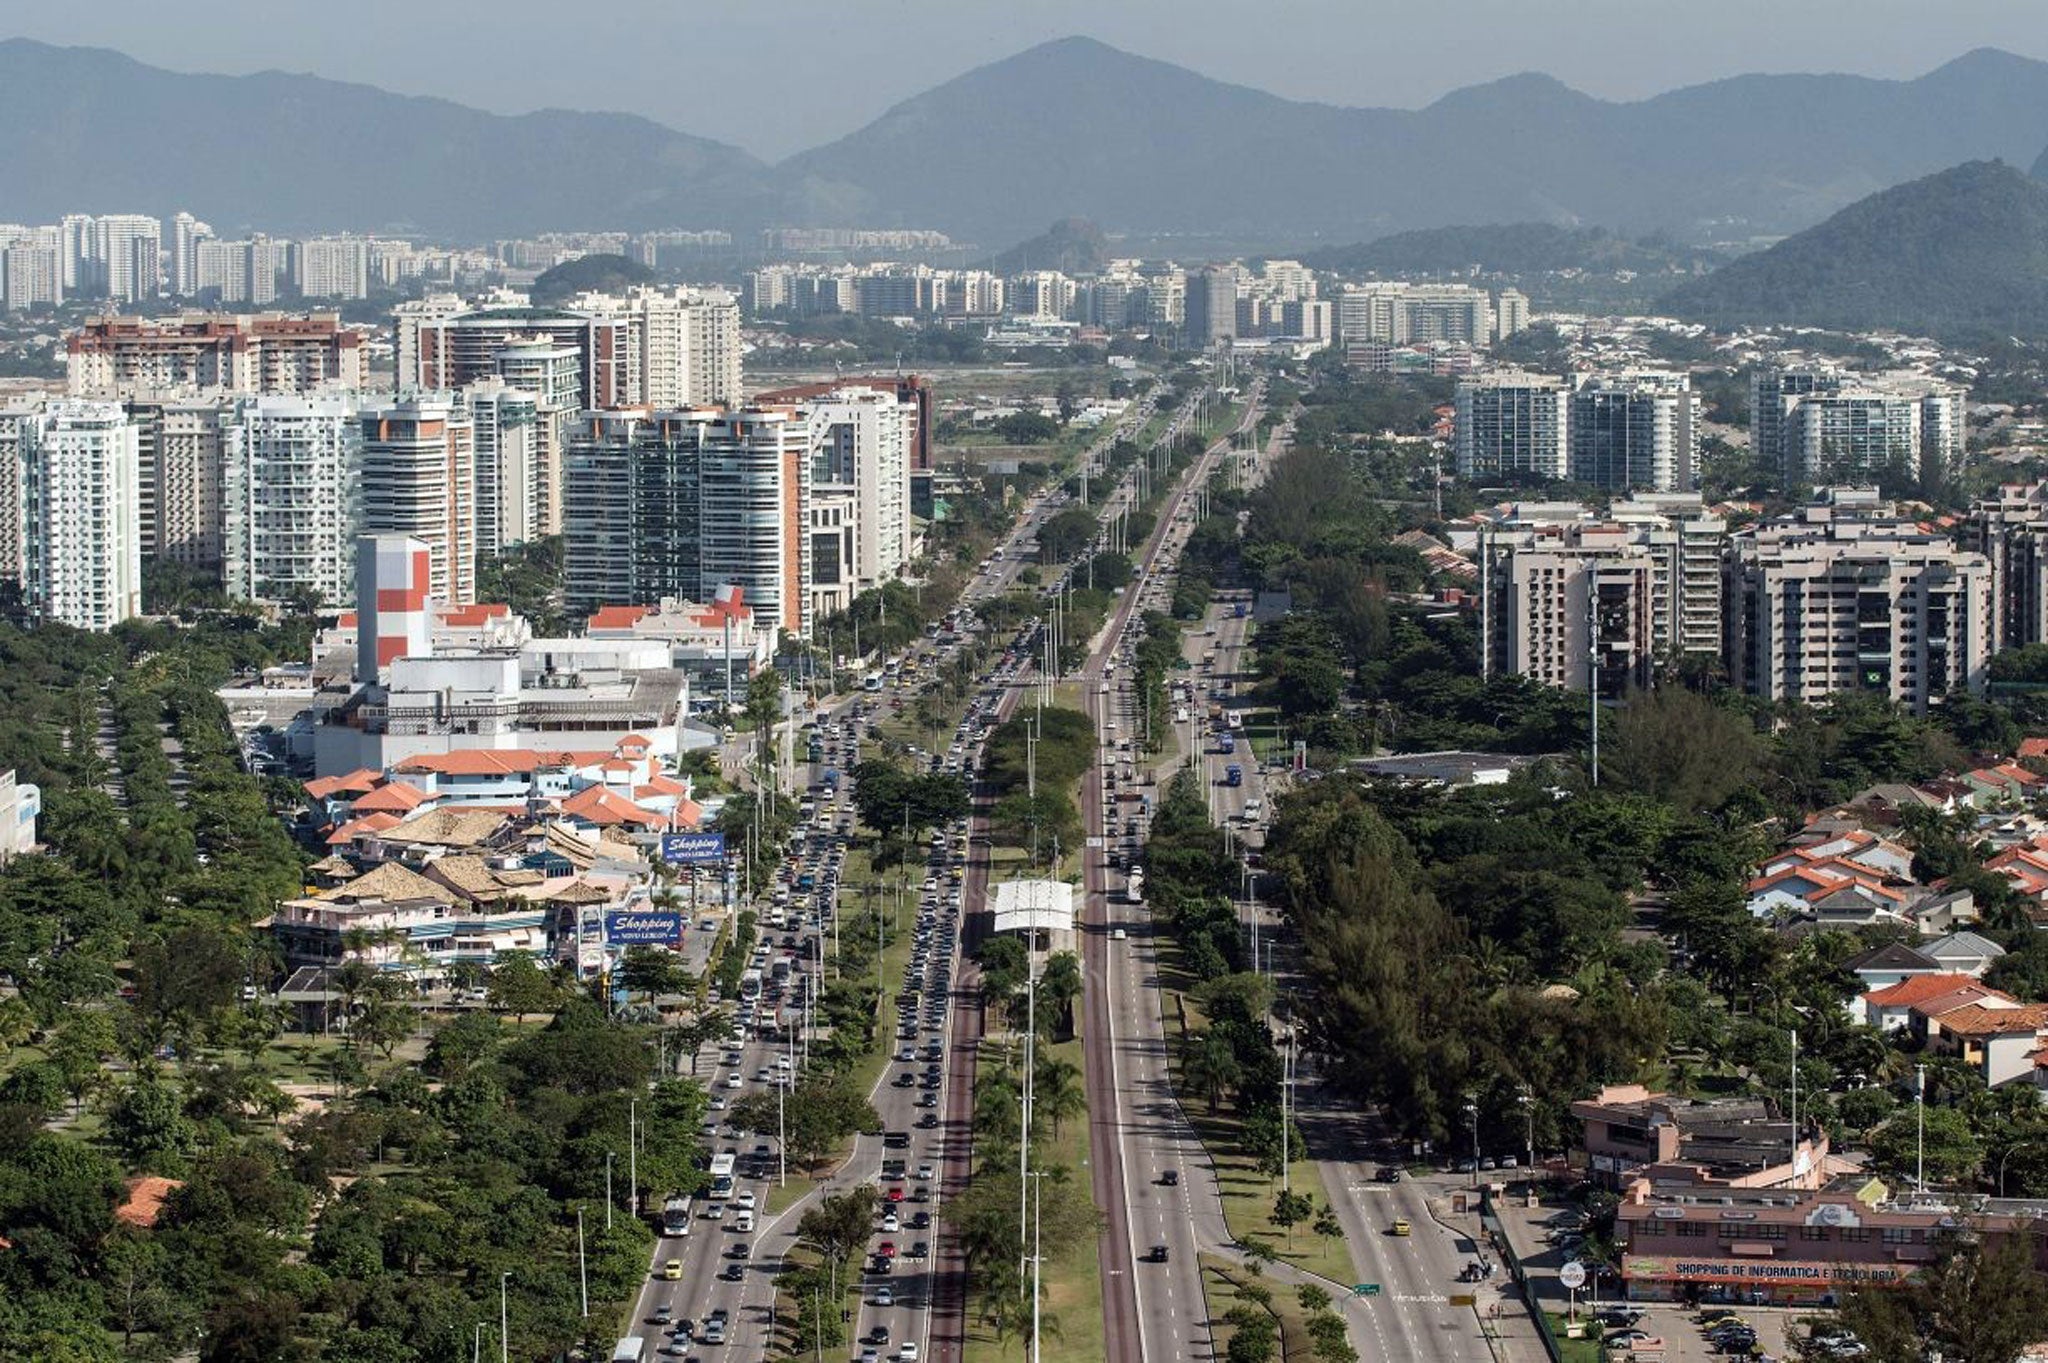 Highway to growth? The First State fund has invested in Brazilian toll roads as it believes the political risk is under control